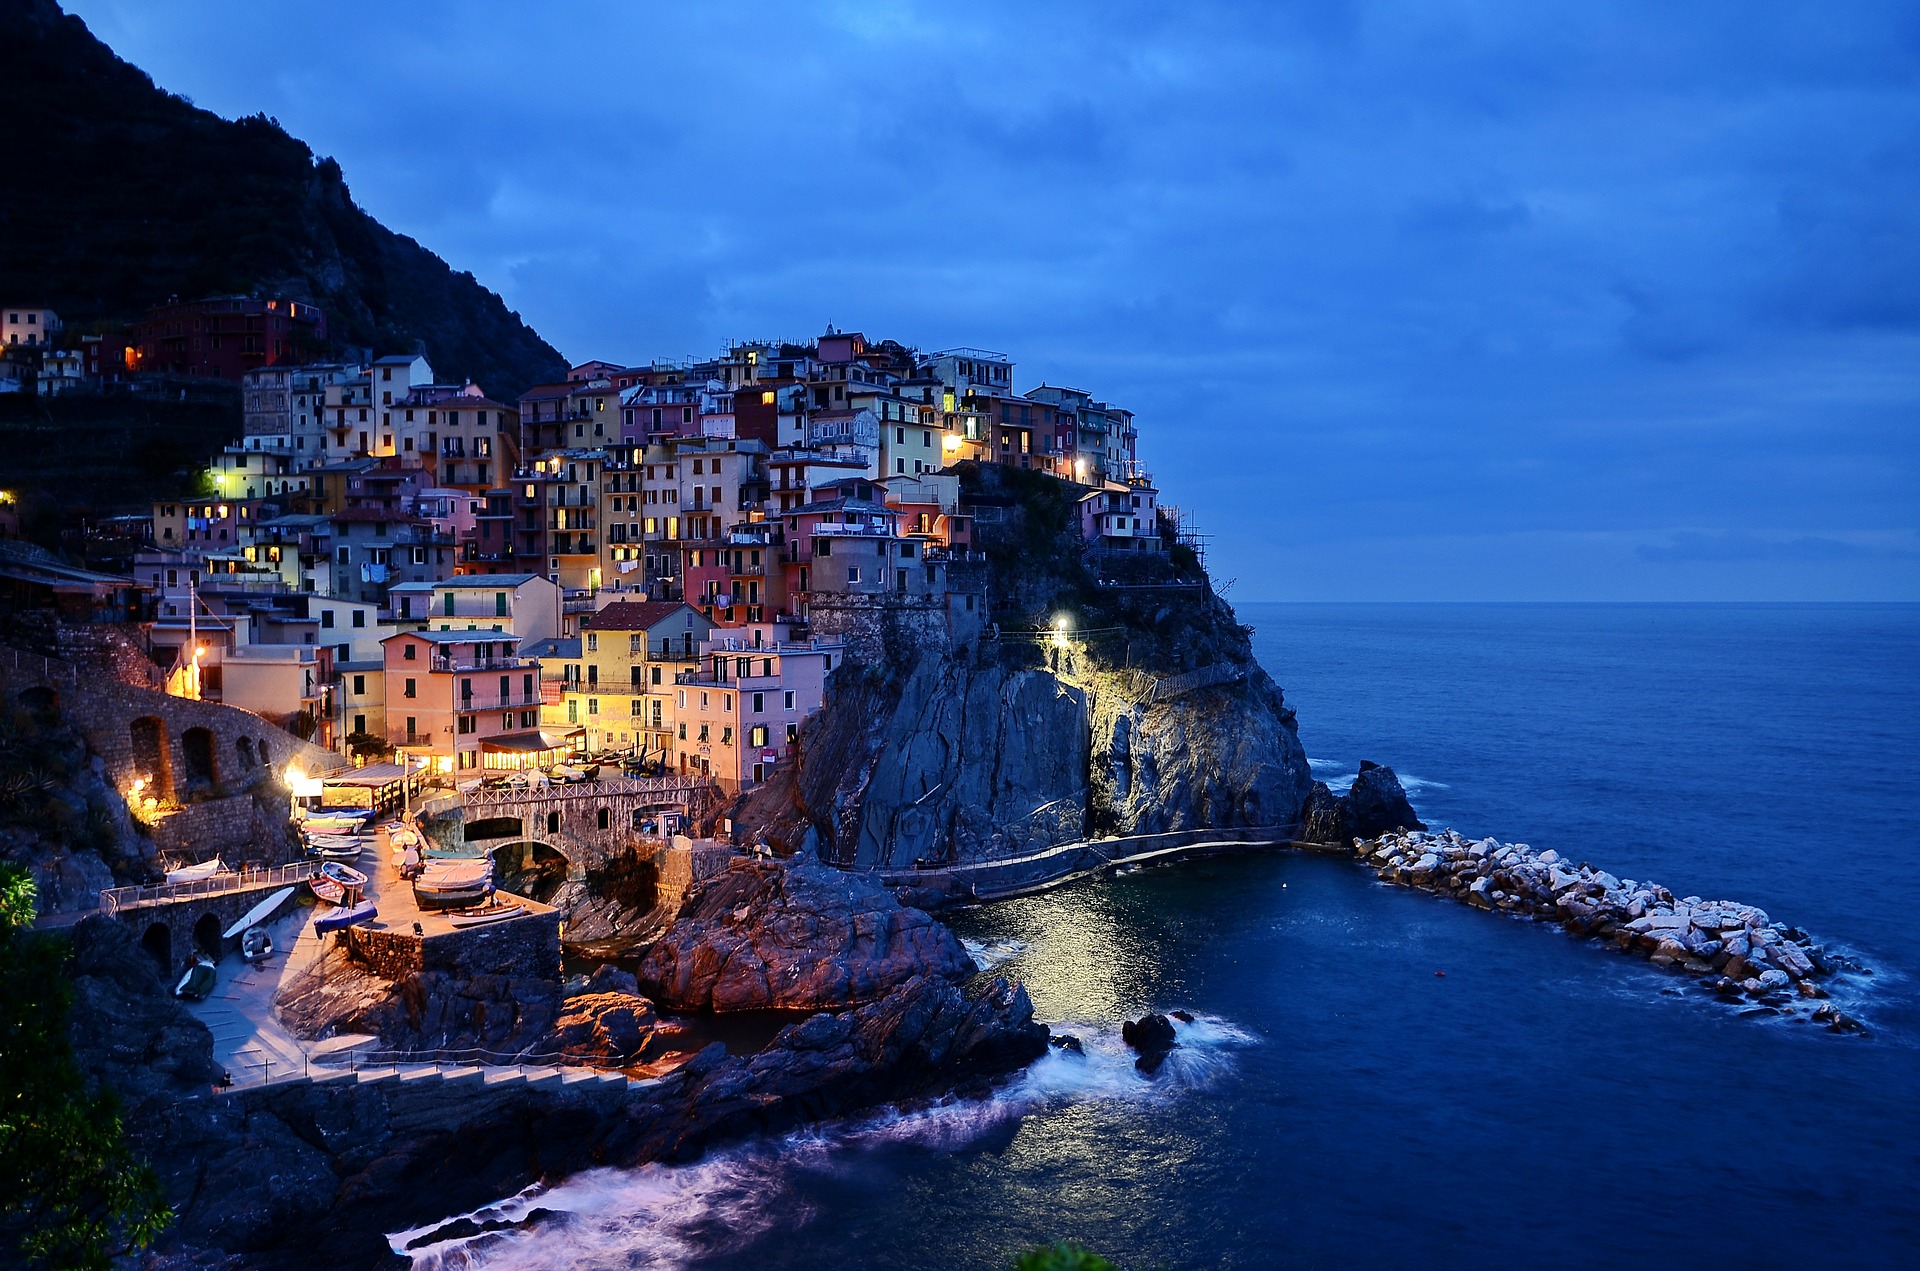 Planning a Trip to Italy: Cinque Terre